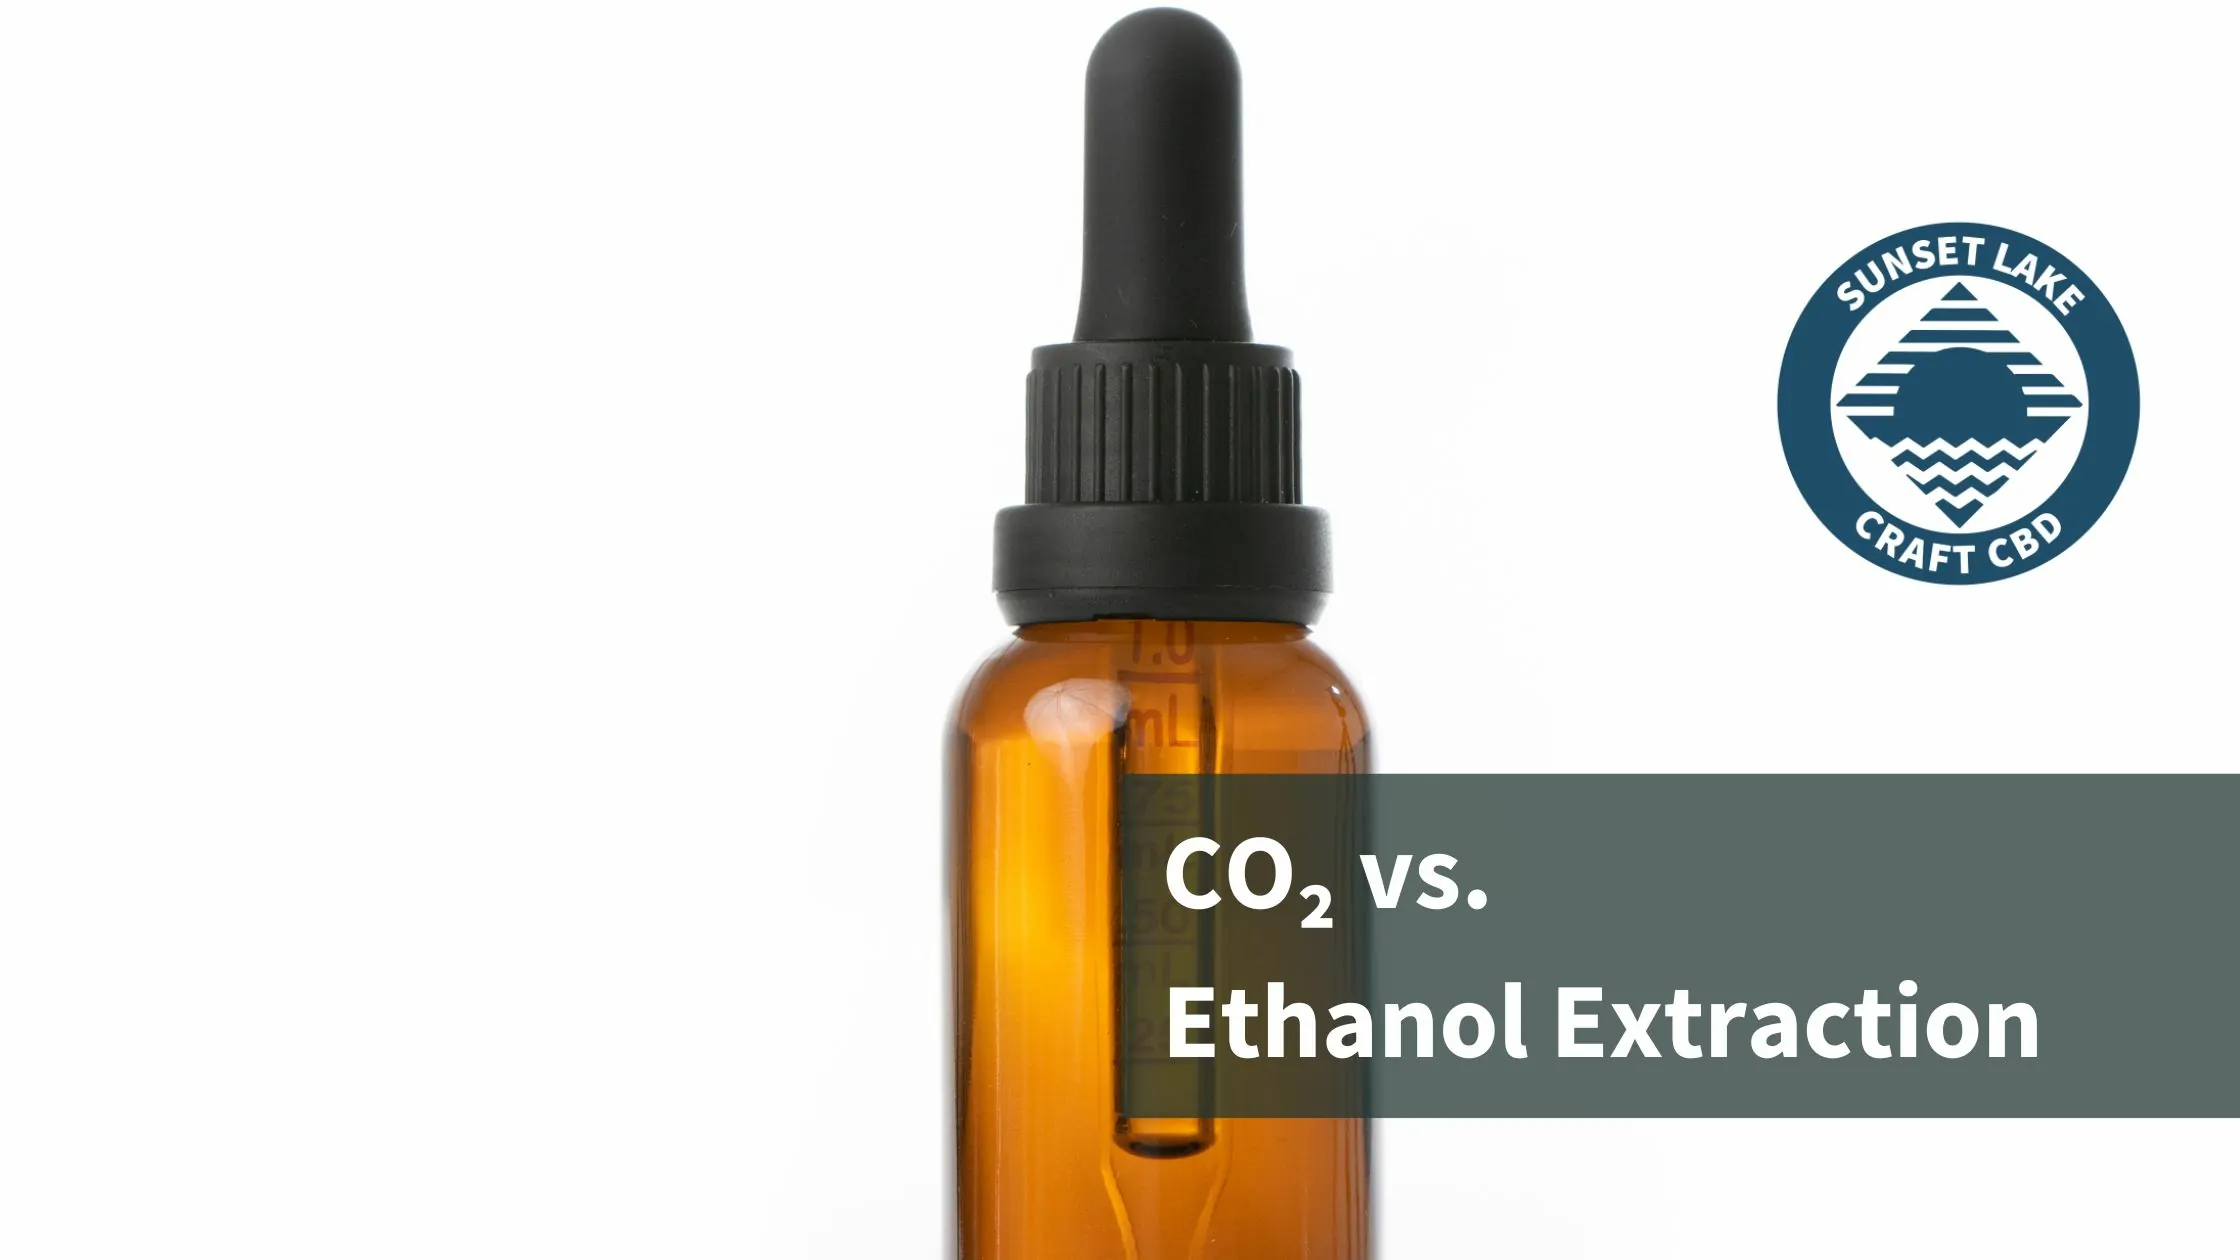 CO₂ vs. Ethanol Extraction: Which Is Better?